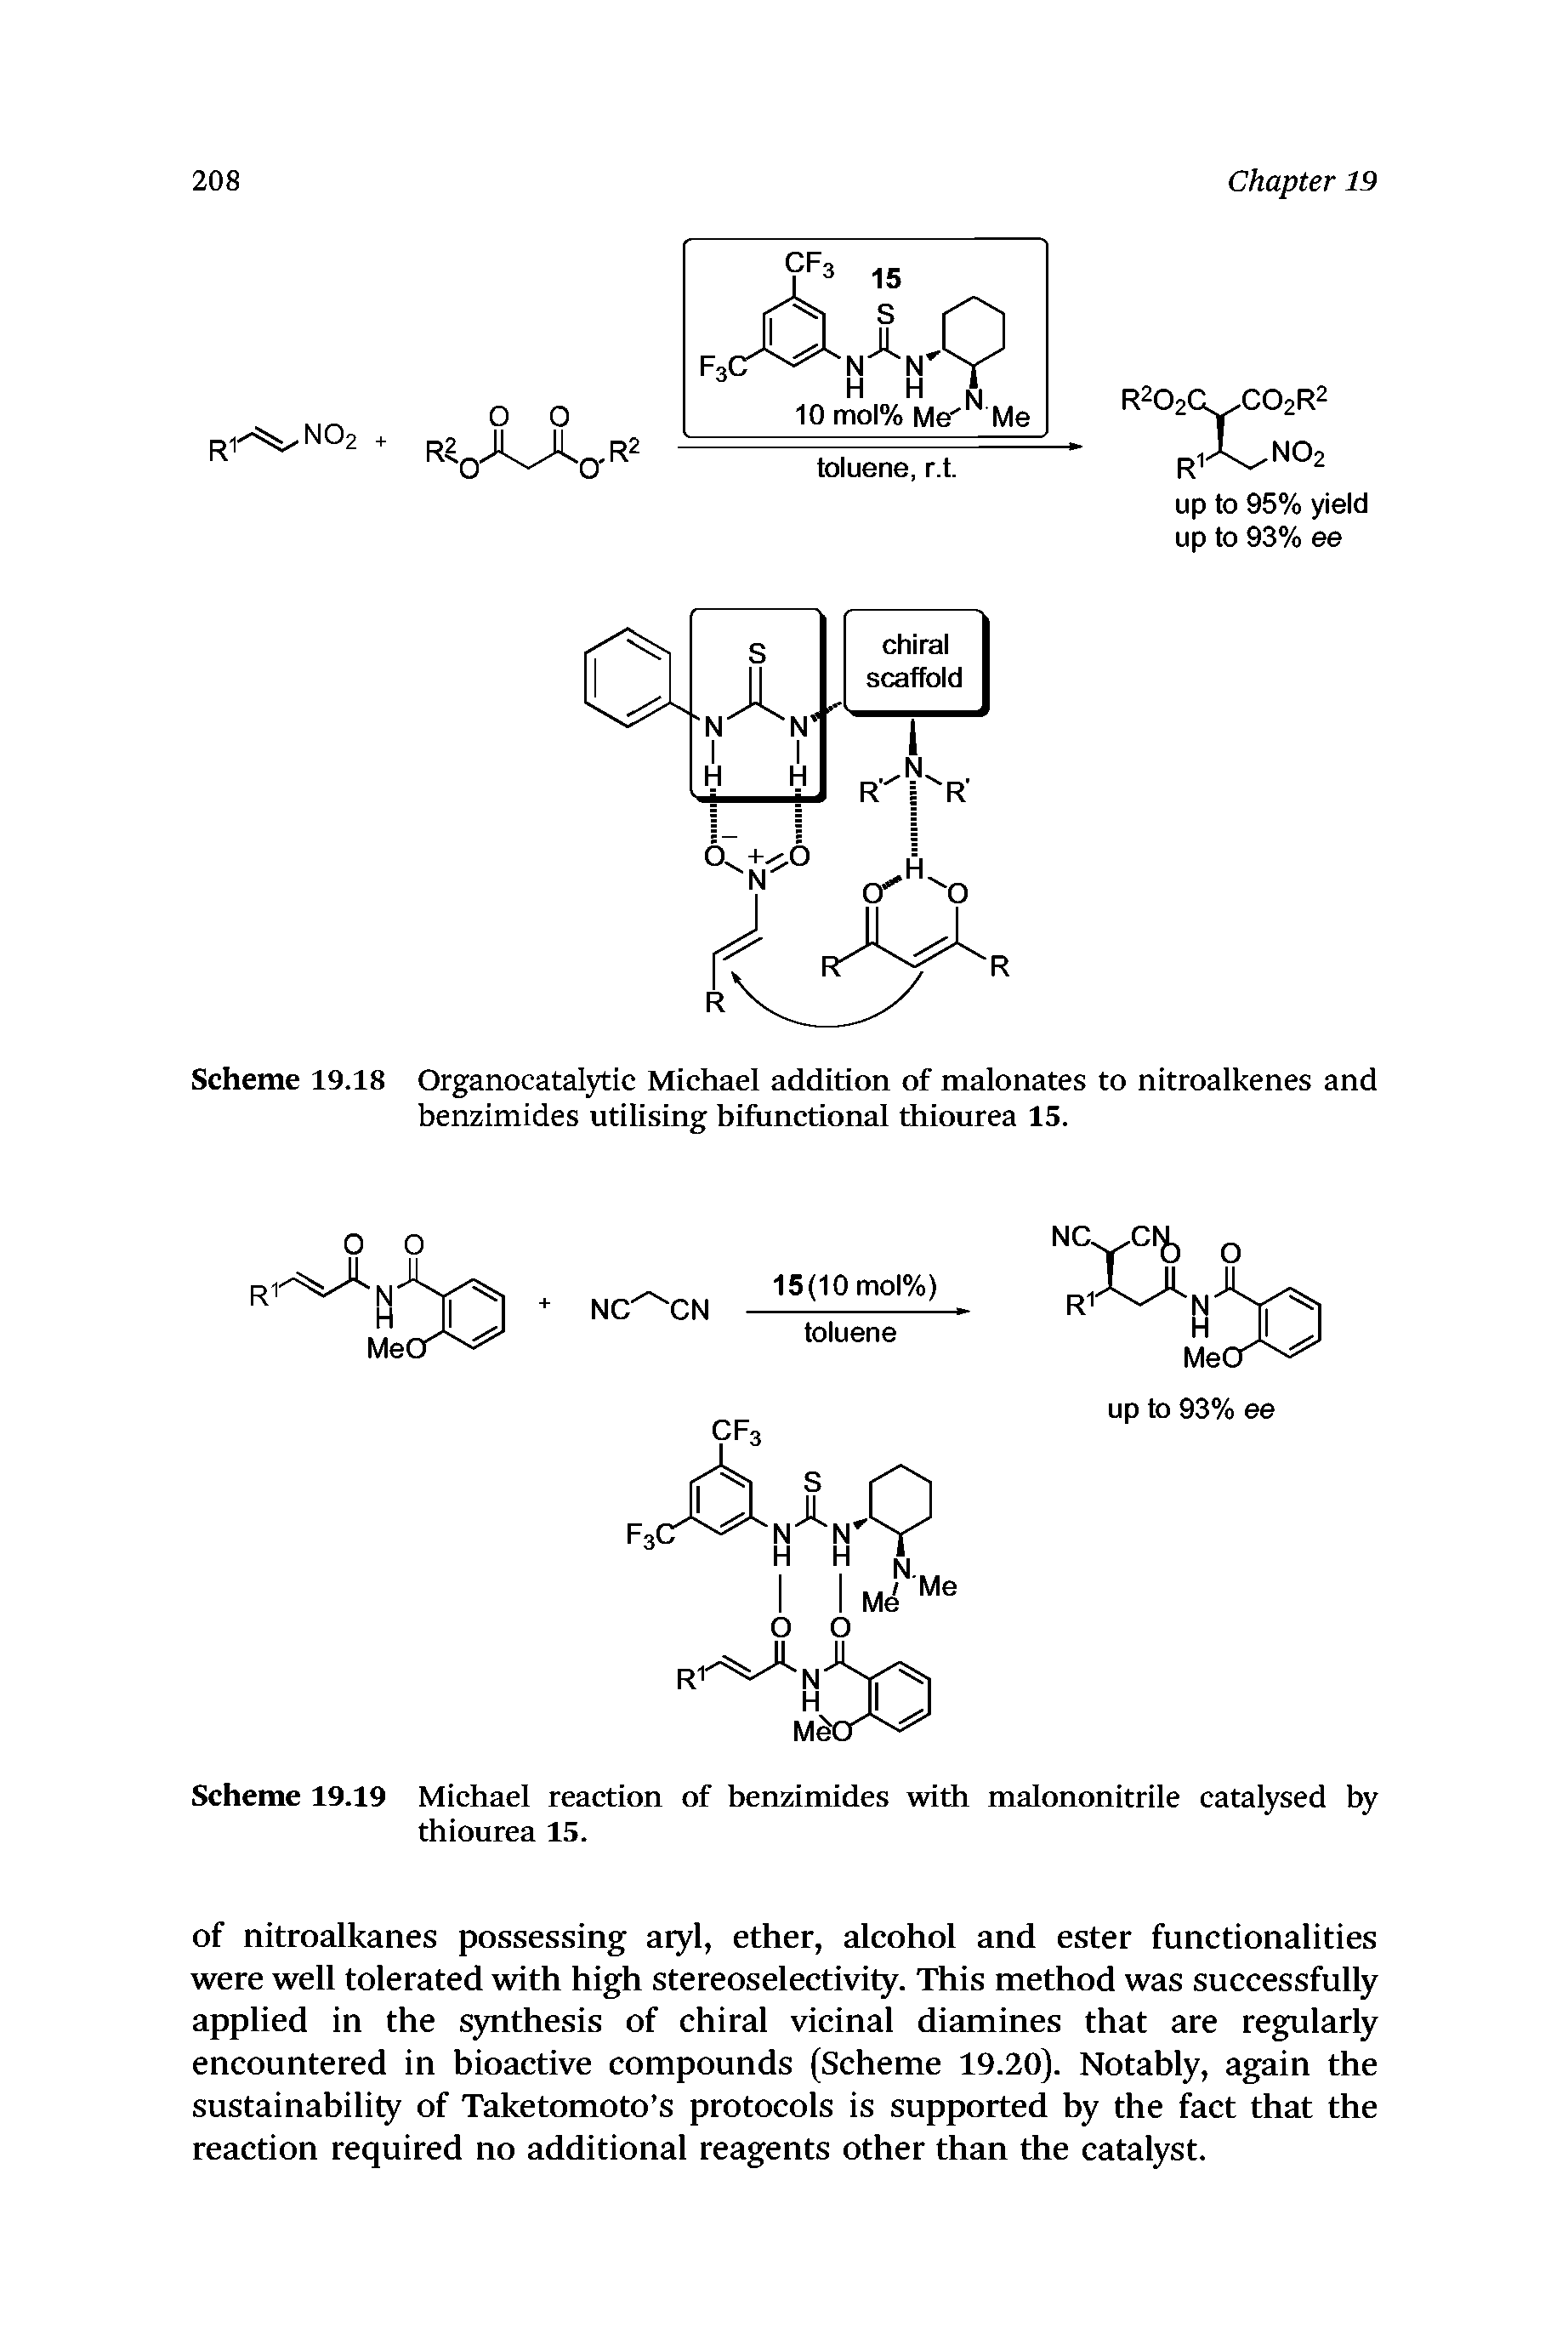 Scheme 19.19 Michael reaction of benzimides with malononitrile catalysed by thiourea 15.